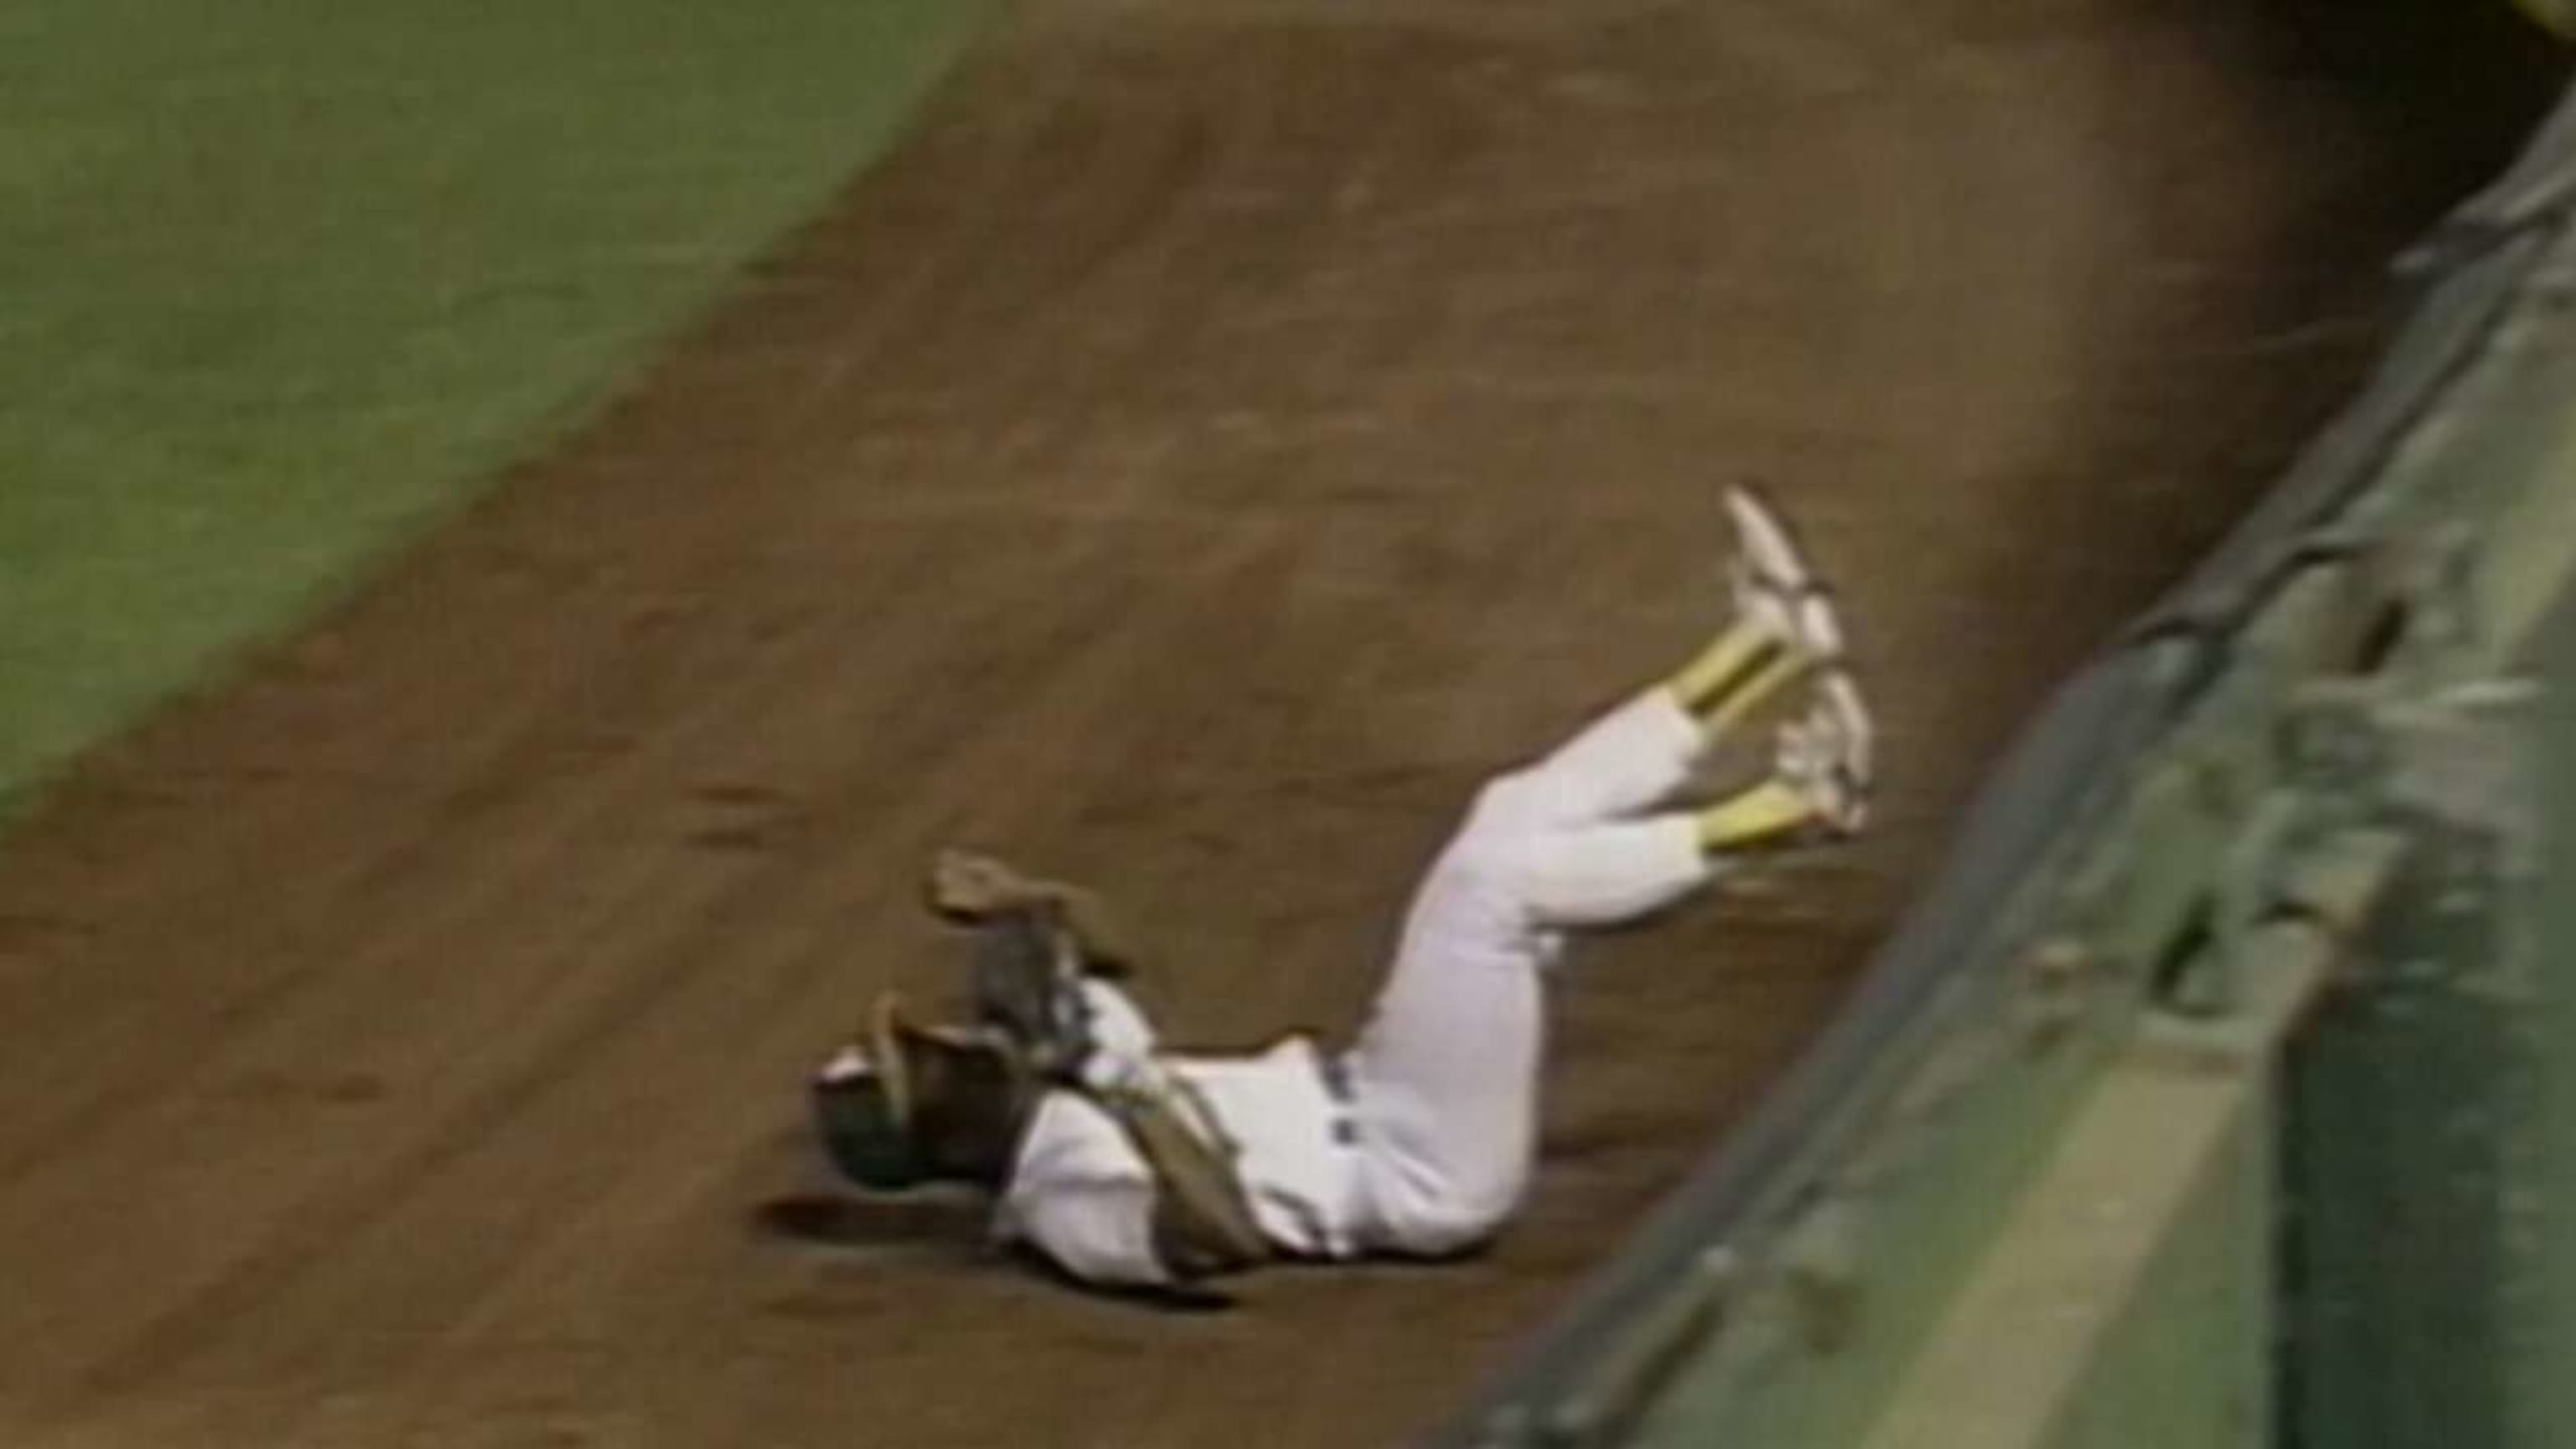 Rickey Henderson (MLB Outfielder) - On This Day